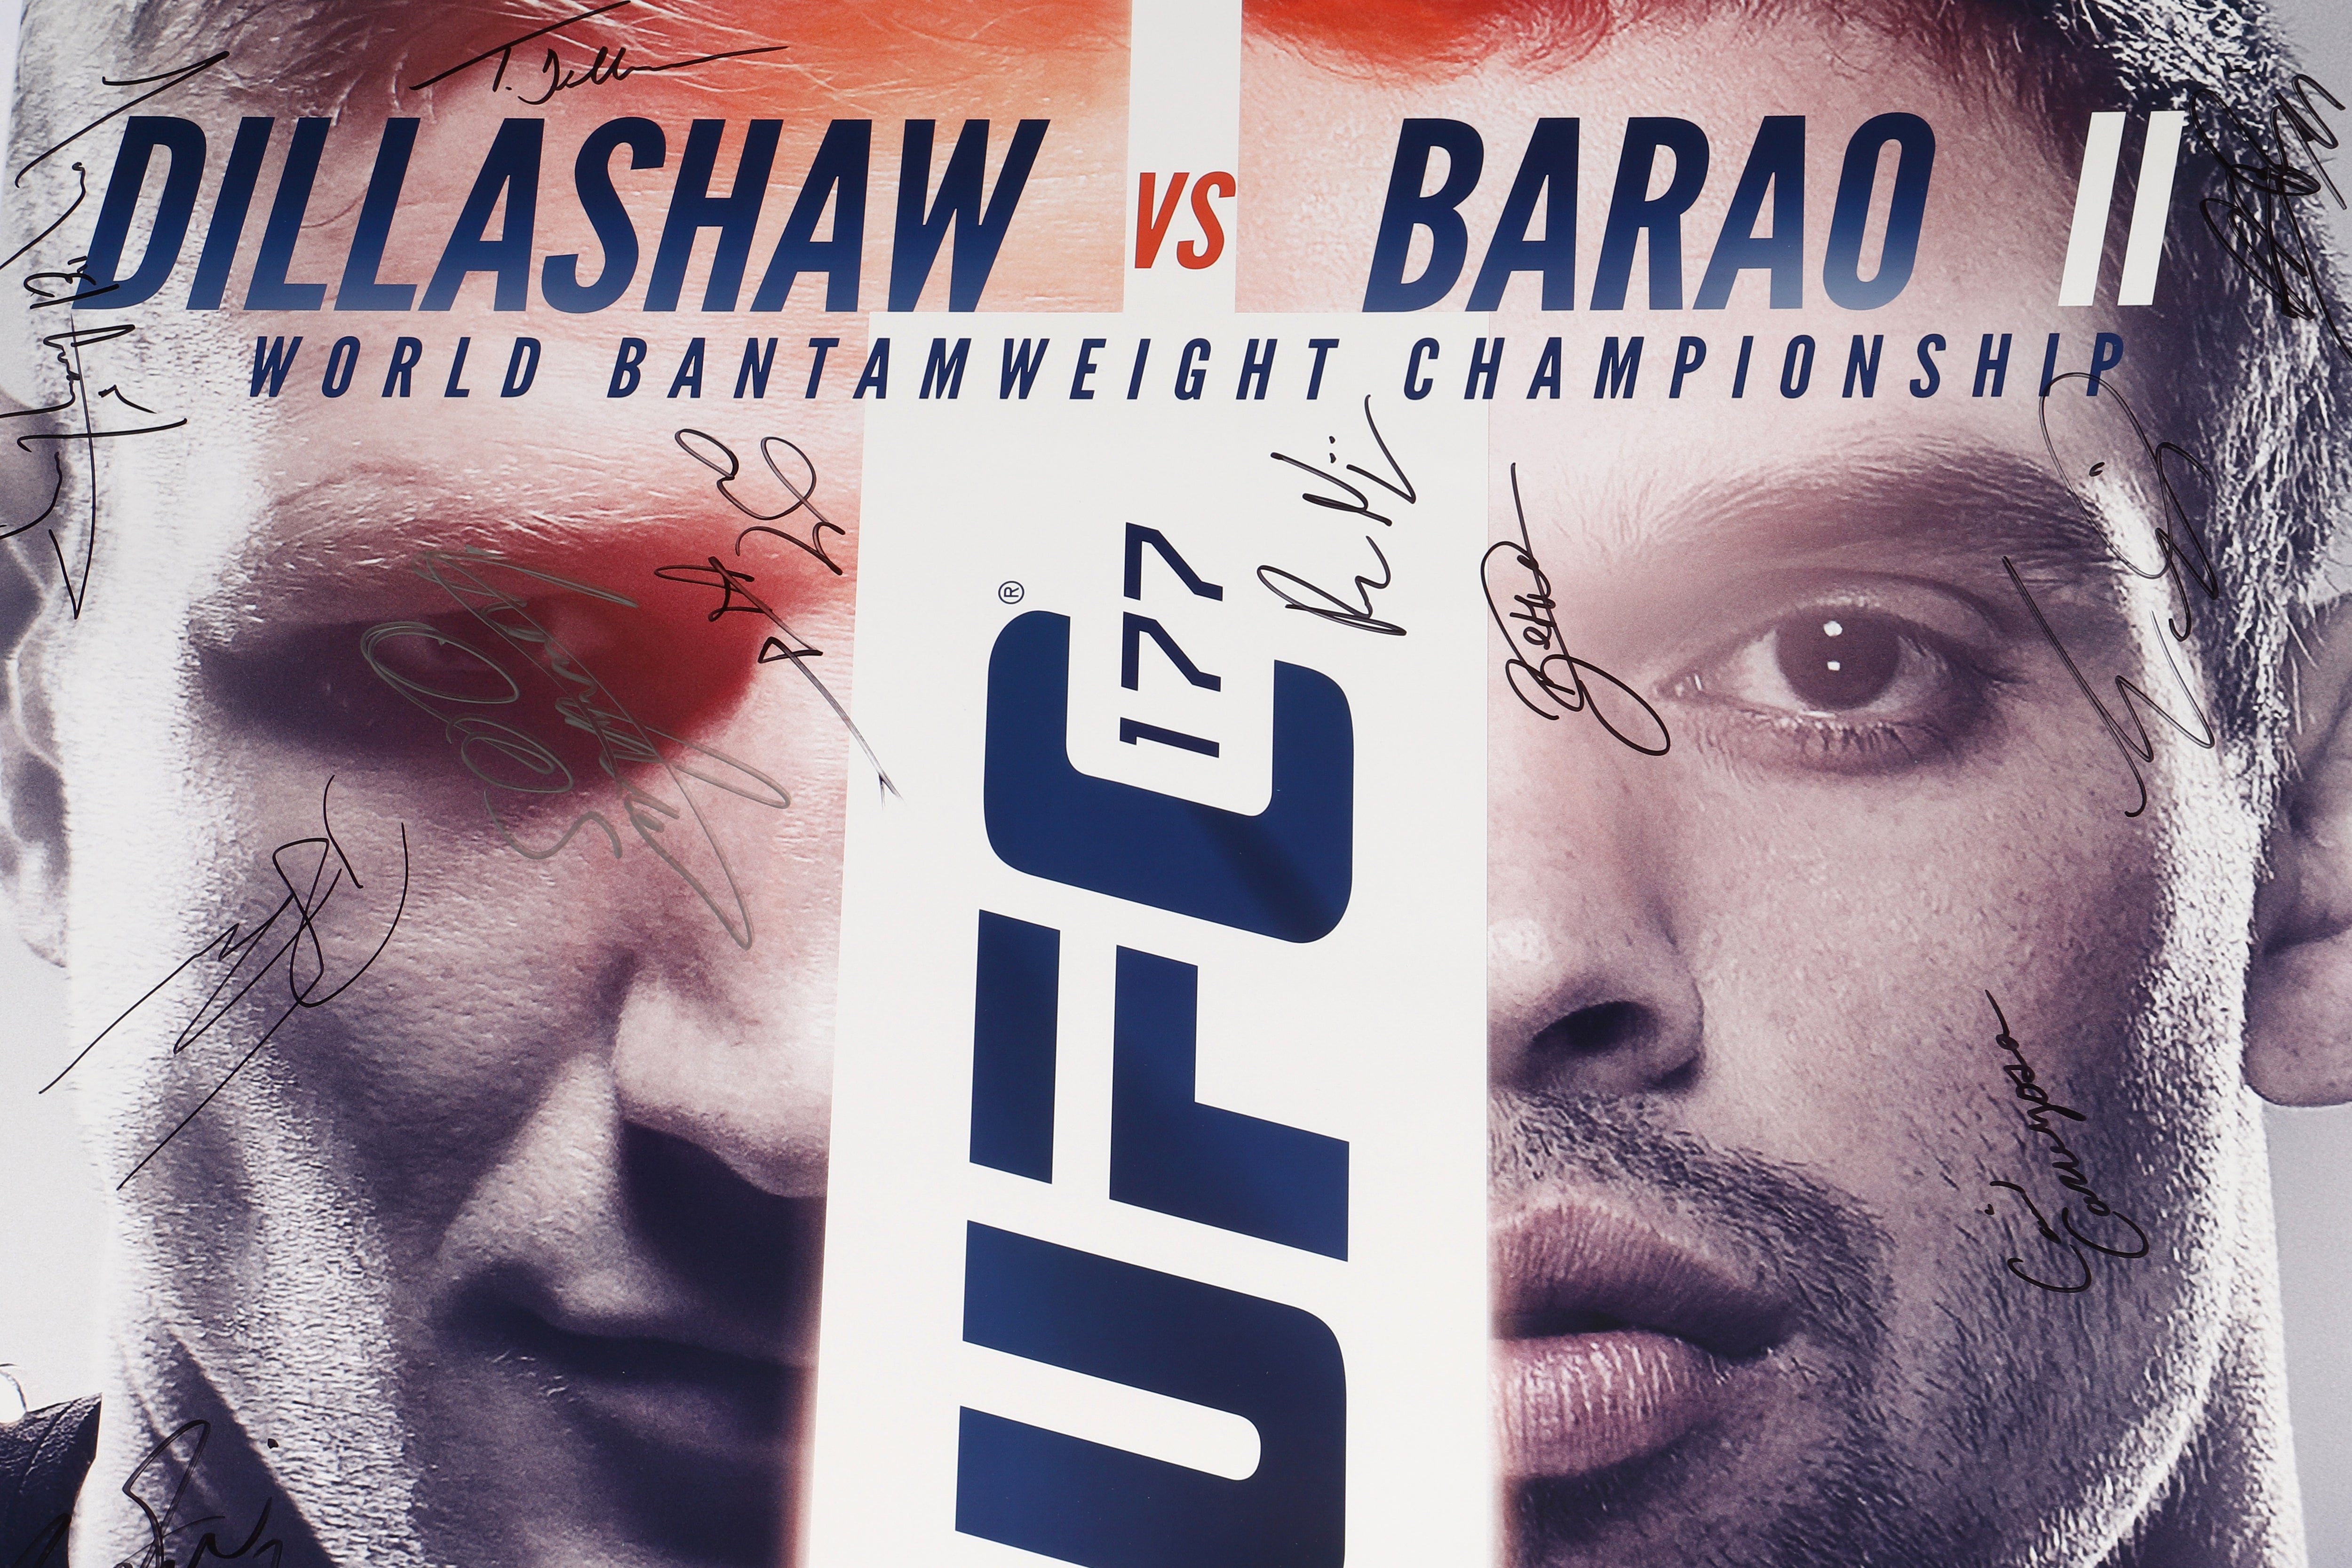 signed poster by Dillashaw & Soto